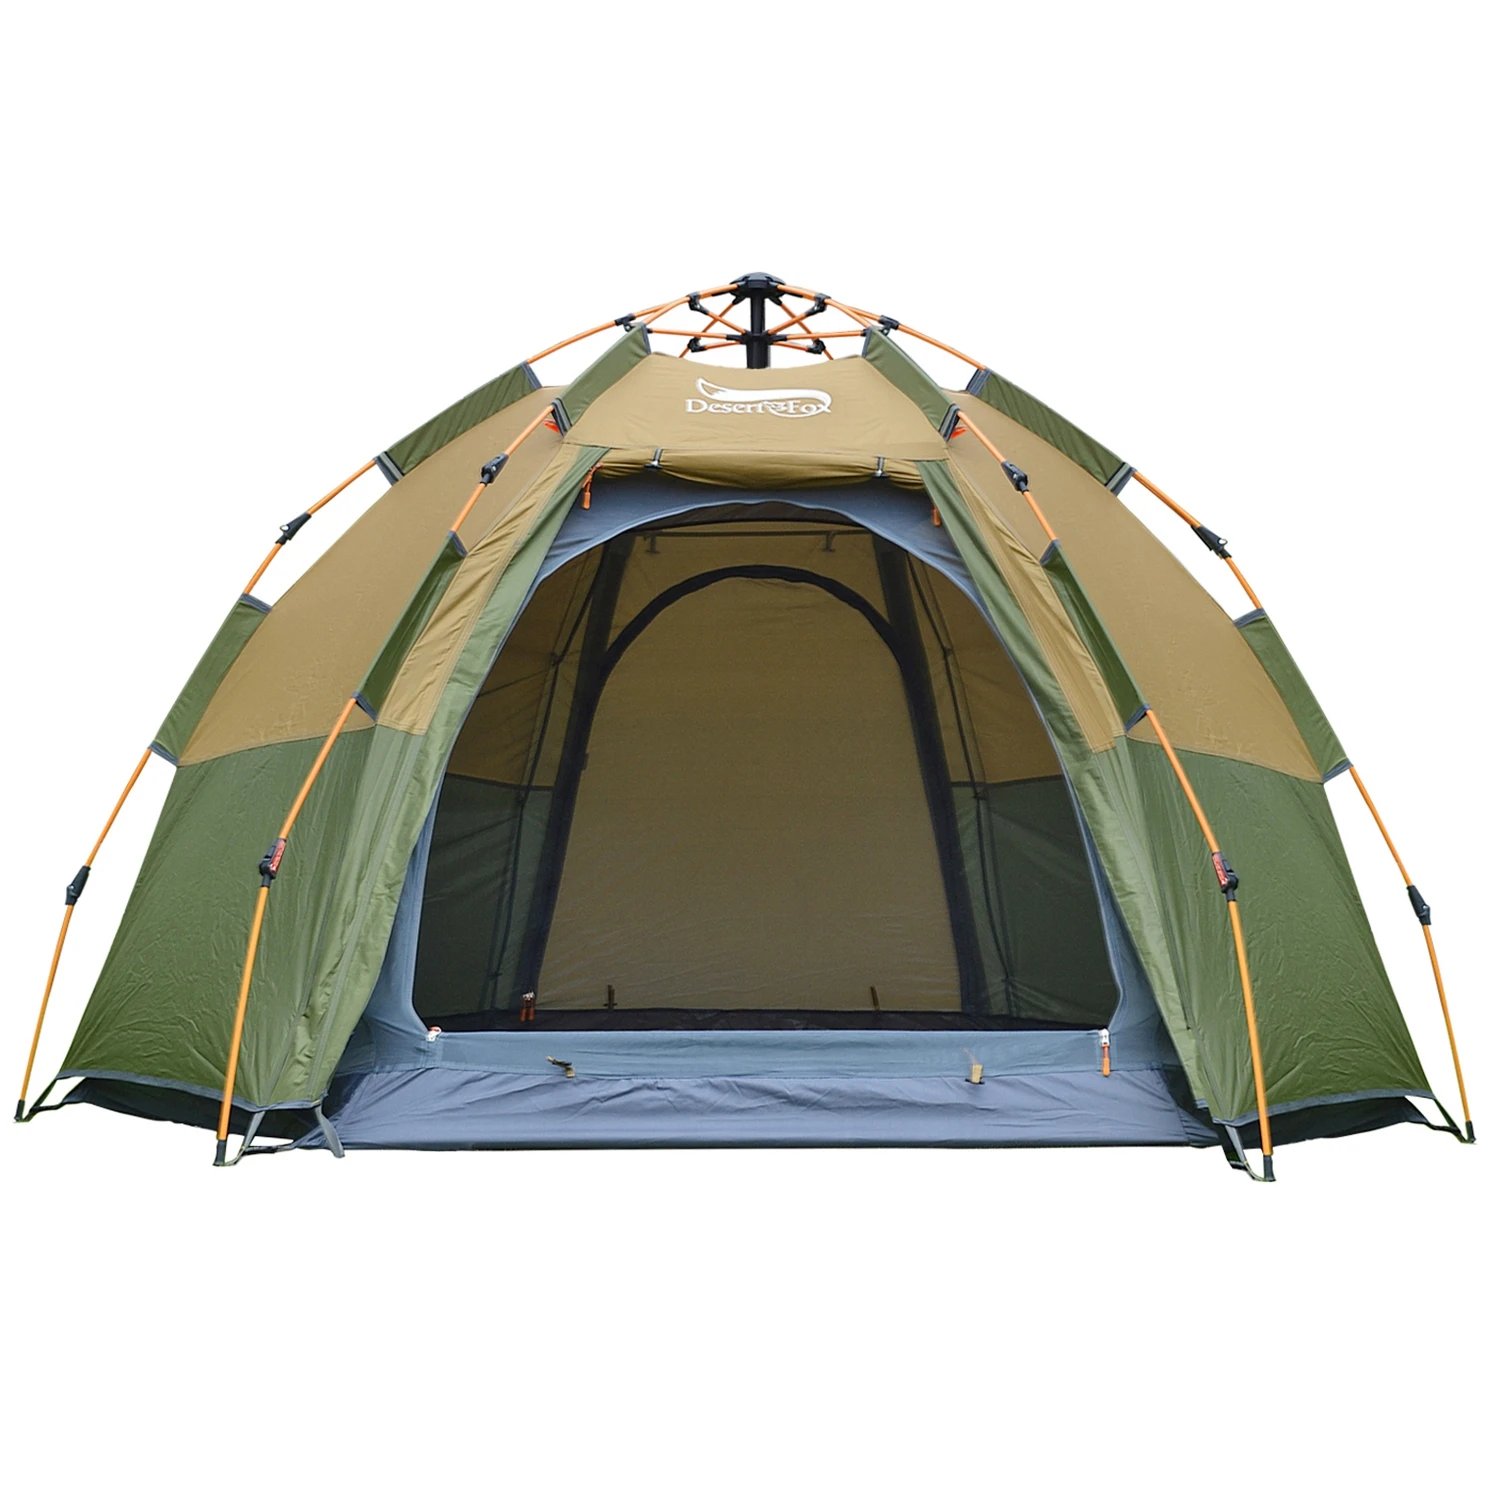 Traveling Hiking Camping Tent 3-4 Person Family Instant PopUp Tent Outdoor